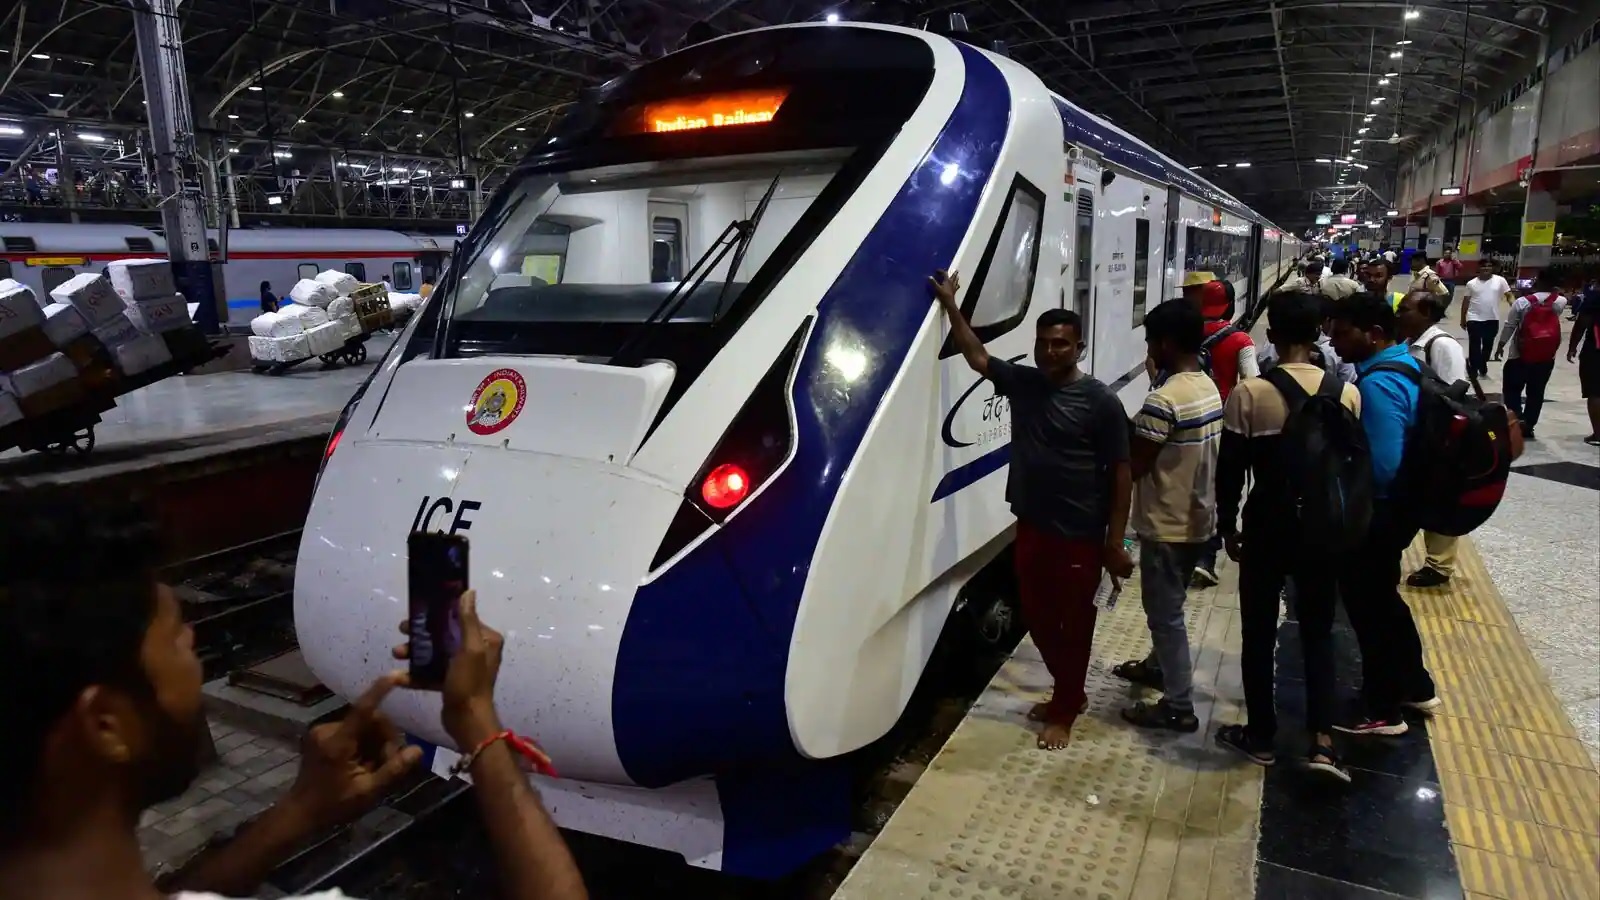 Vande Bharat Express Trains: Indian railways to launch 5 new Vande Bharat express trains, check your city is in the list or not